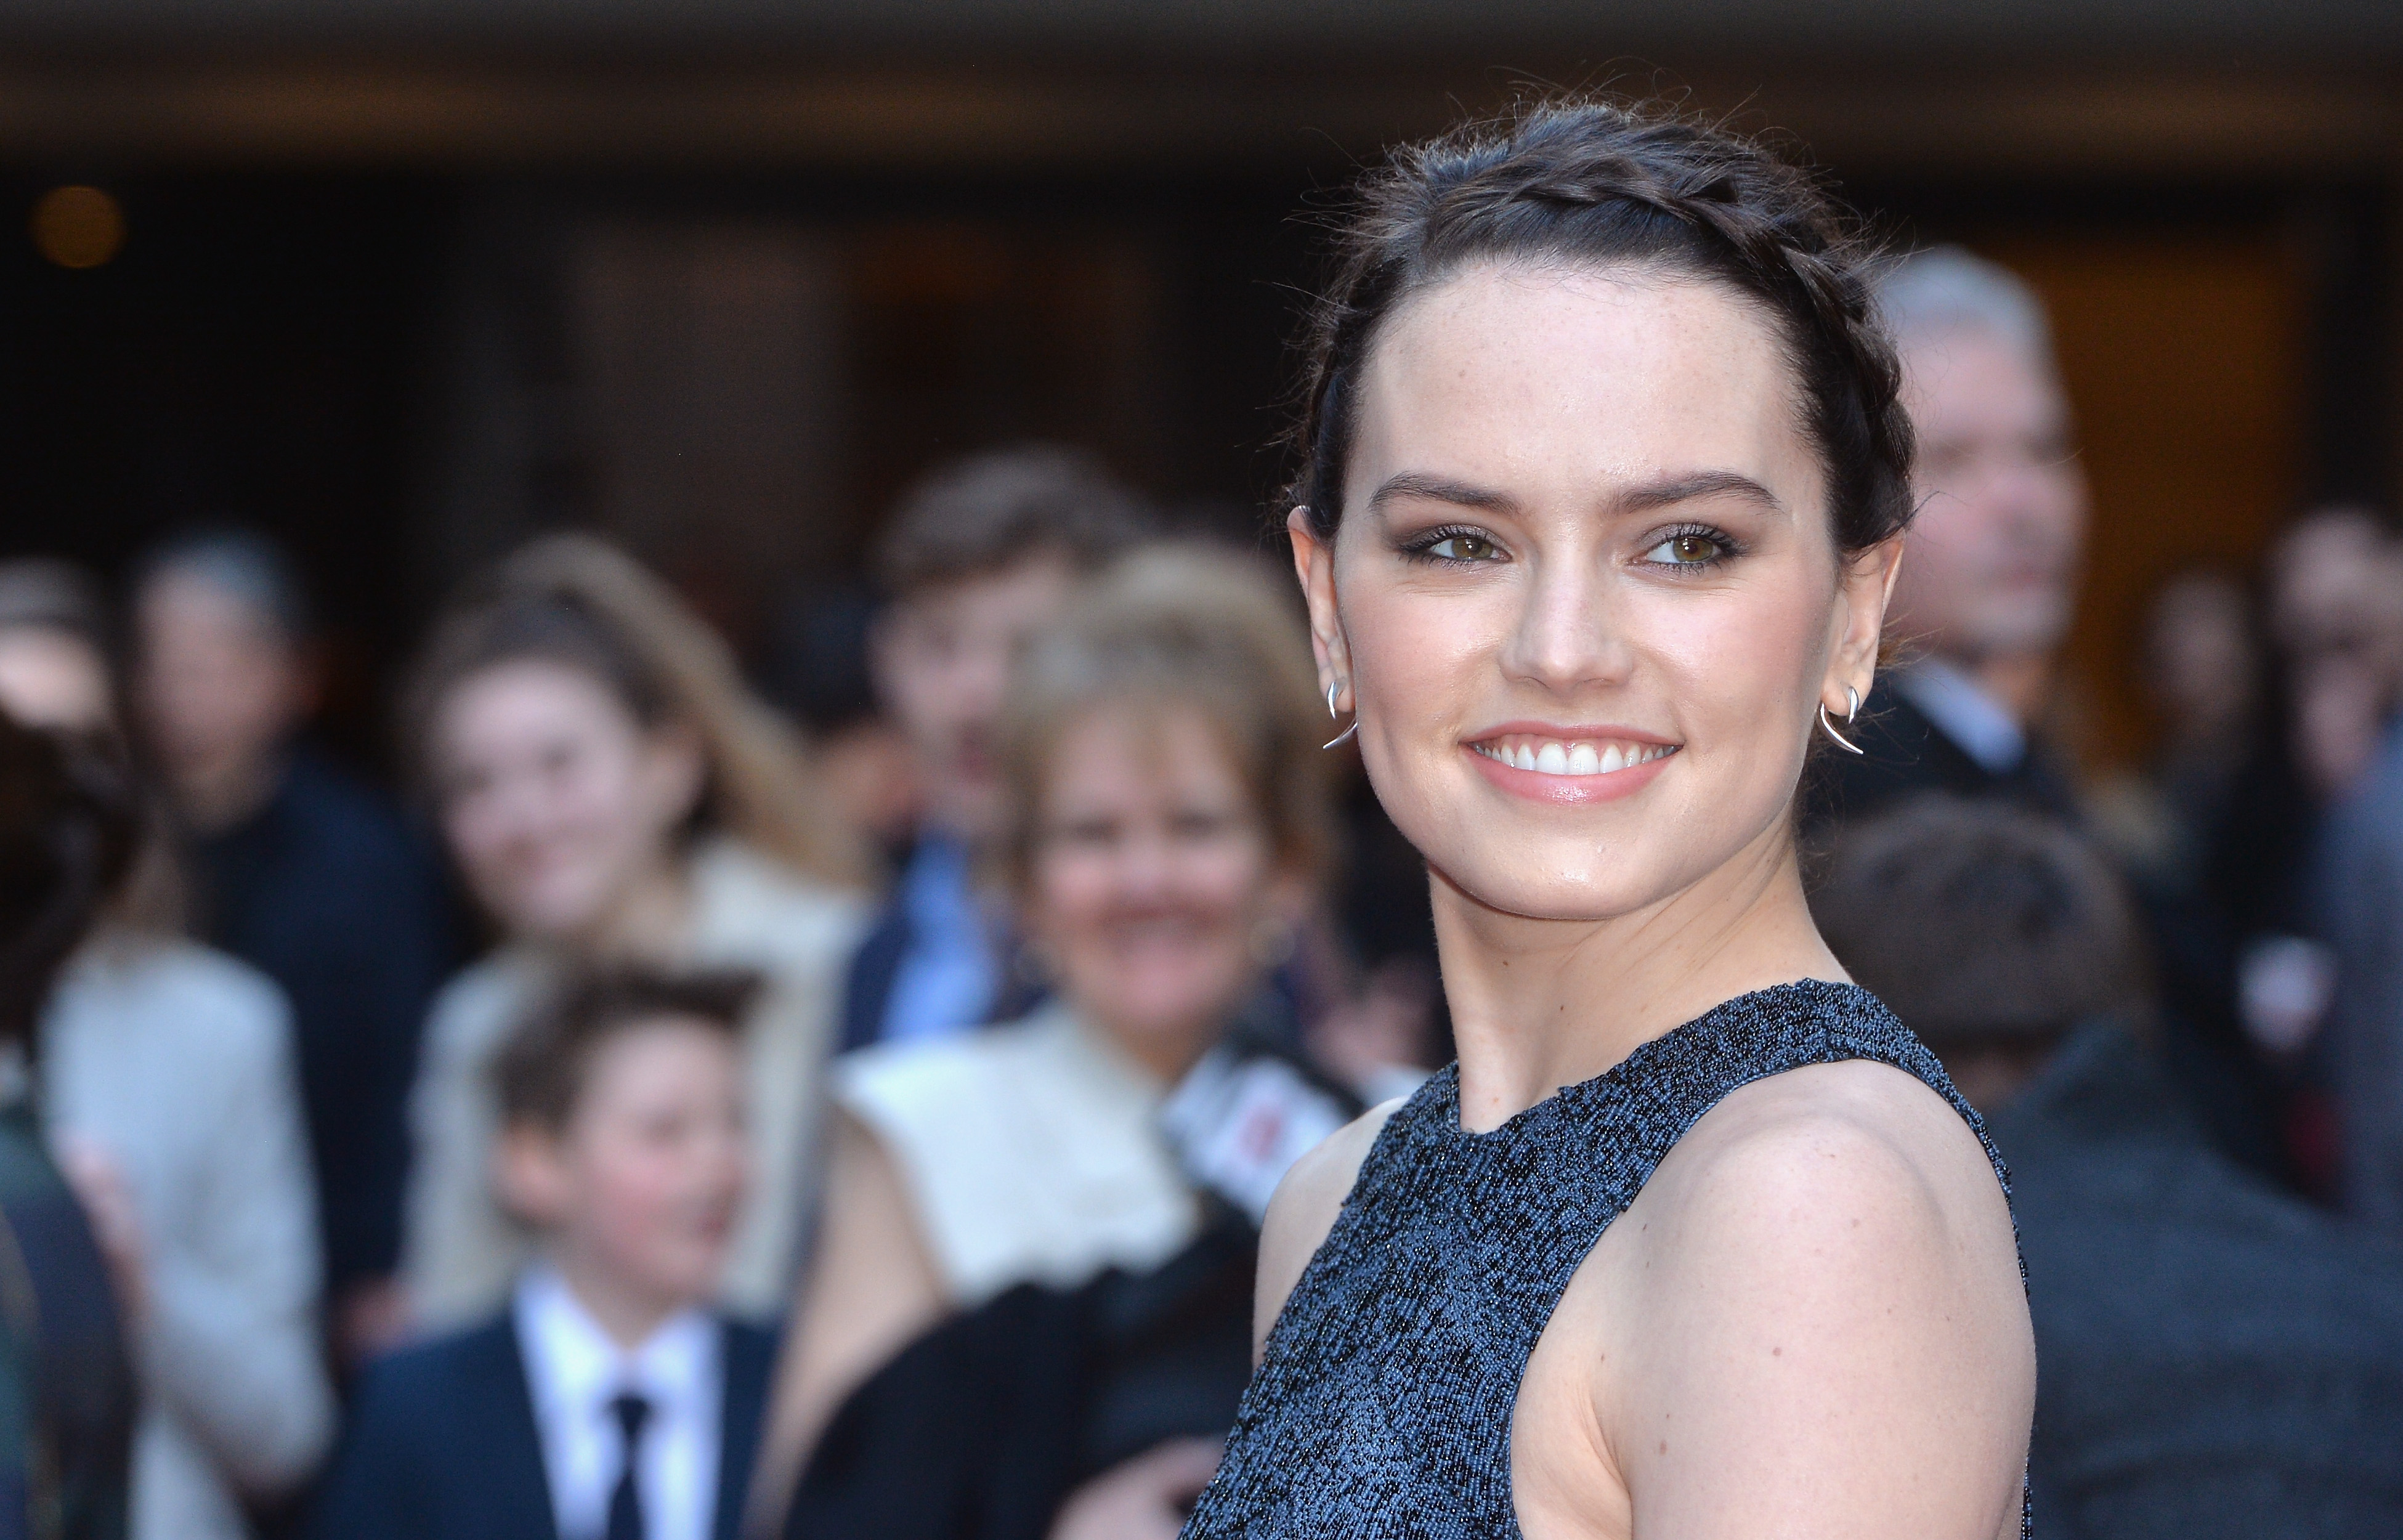 Daisy Ridley attends the Jameson Empire Awards at The Grosvenor House Hotel on March 20, 2016 in London, England. (Anthony Harvey—Getty Images)